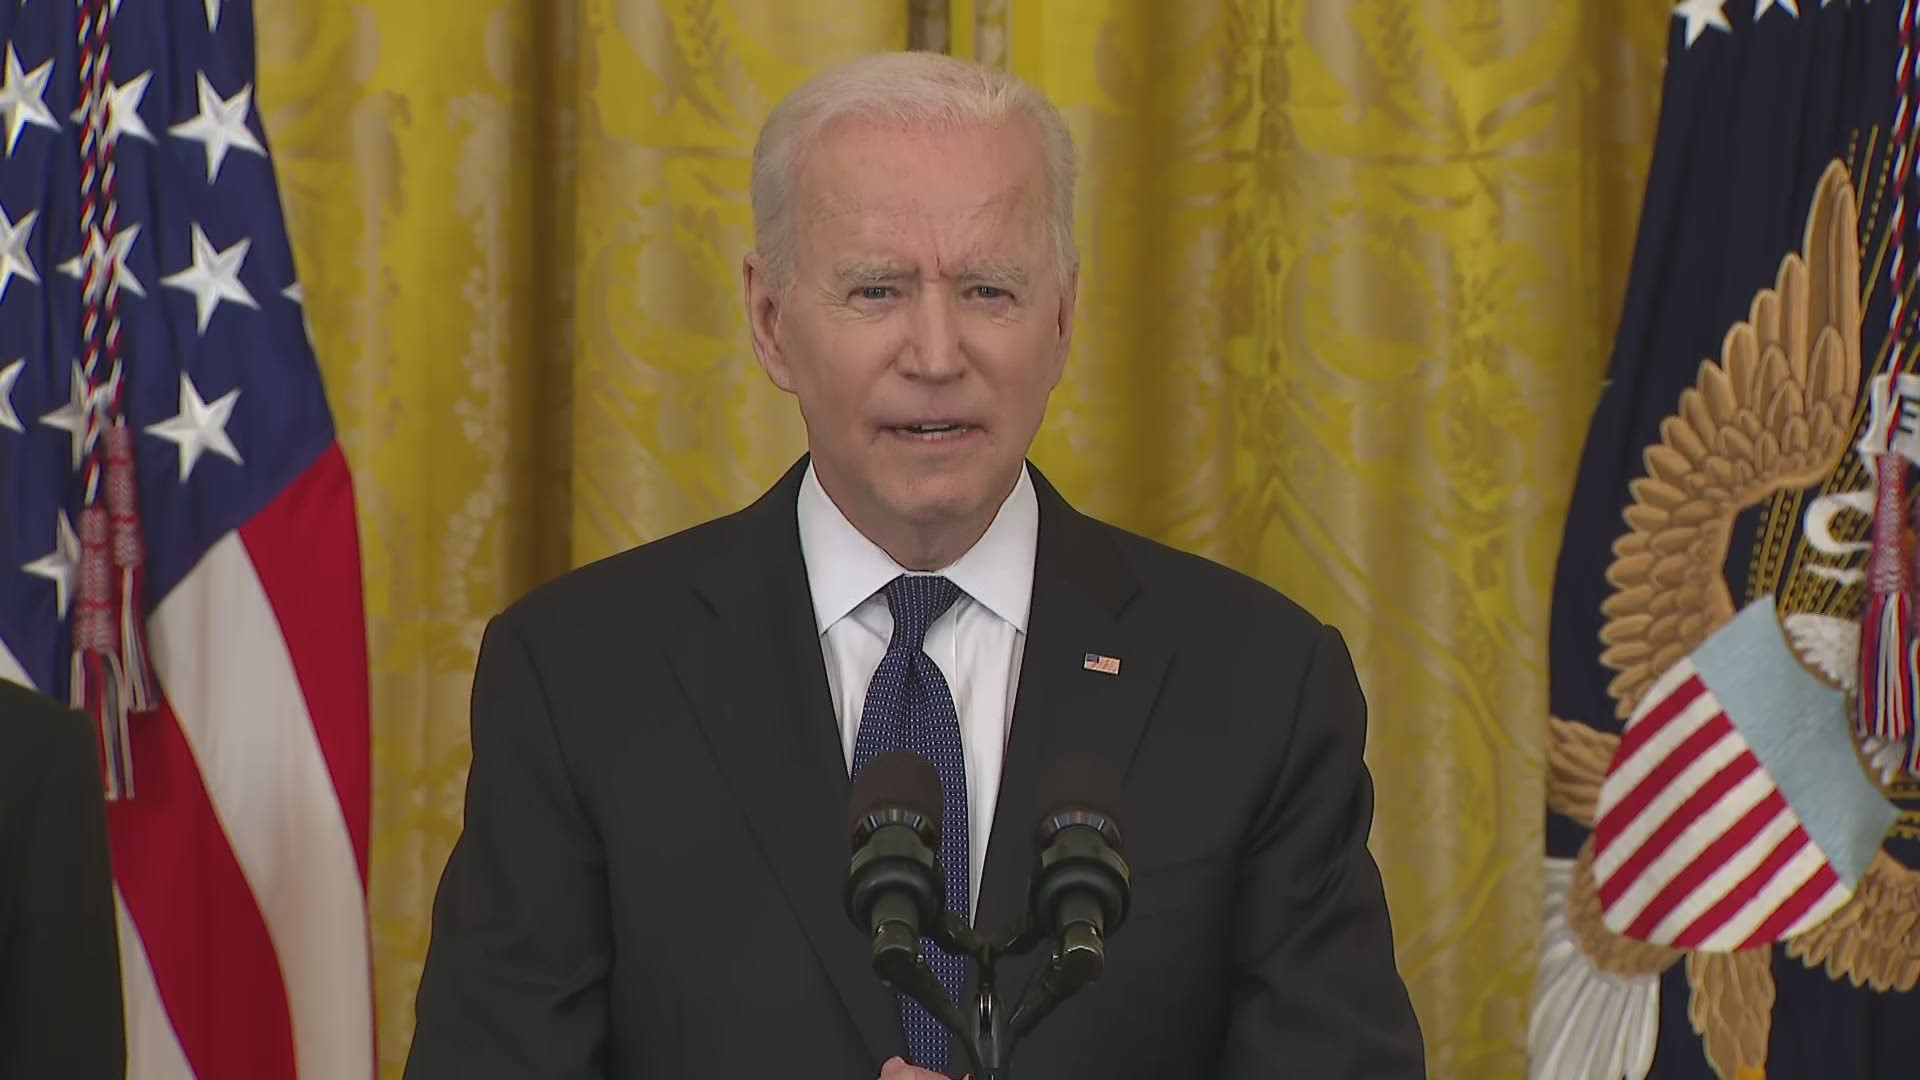 President Biden spoke Thursday before signing a bill to combat anti-Asian hate crimes.